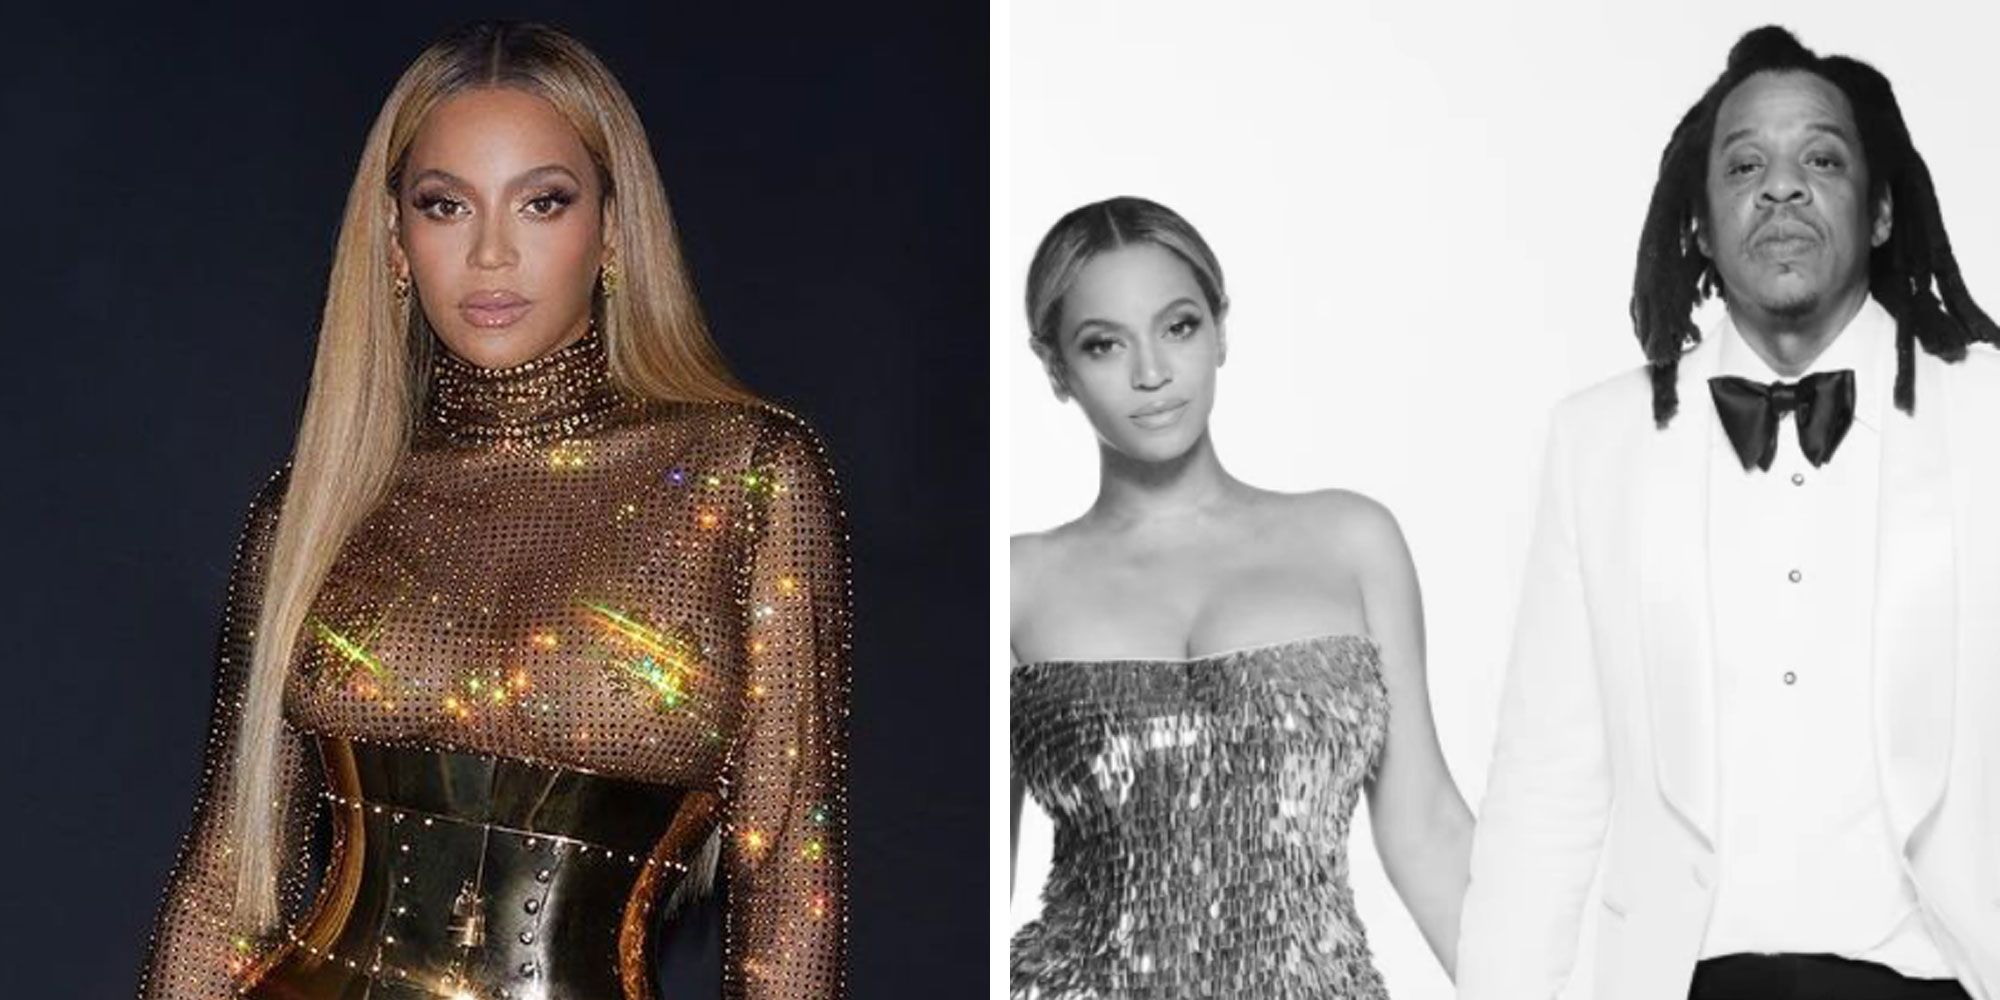 Beyoncé Wore Two Dresses—Including a Sheer Gold One With Pasties—at Her